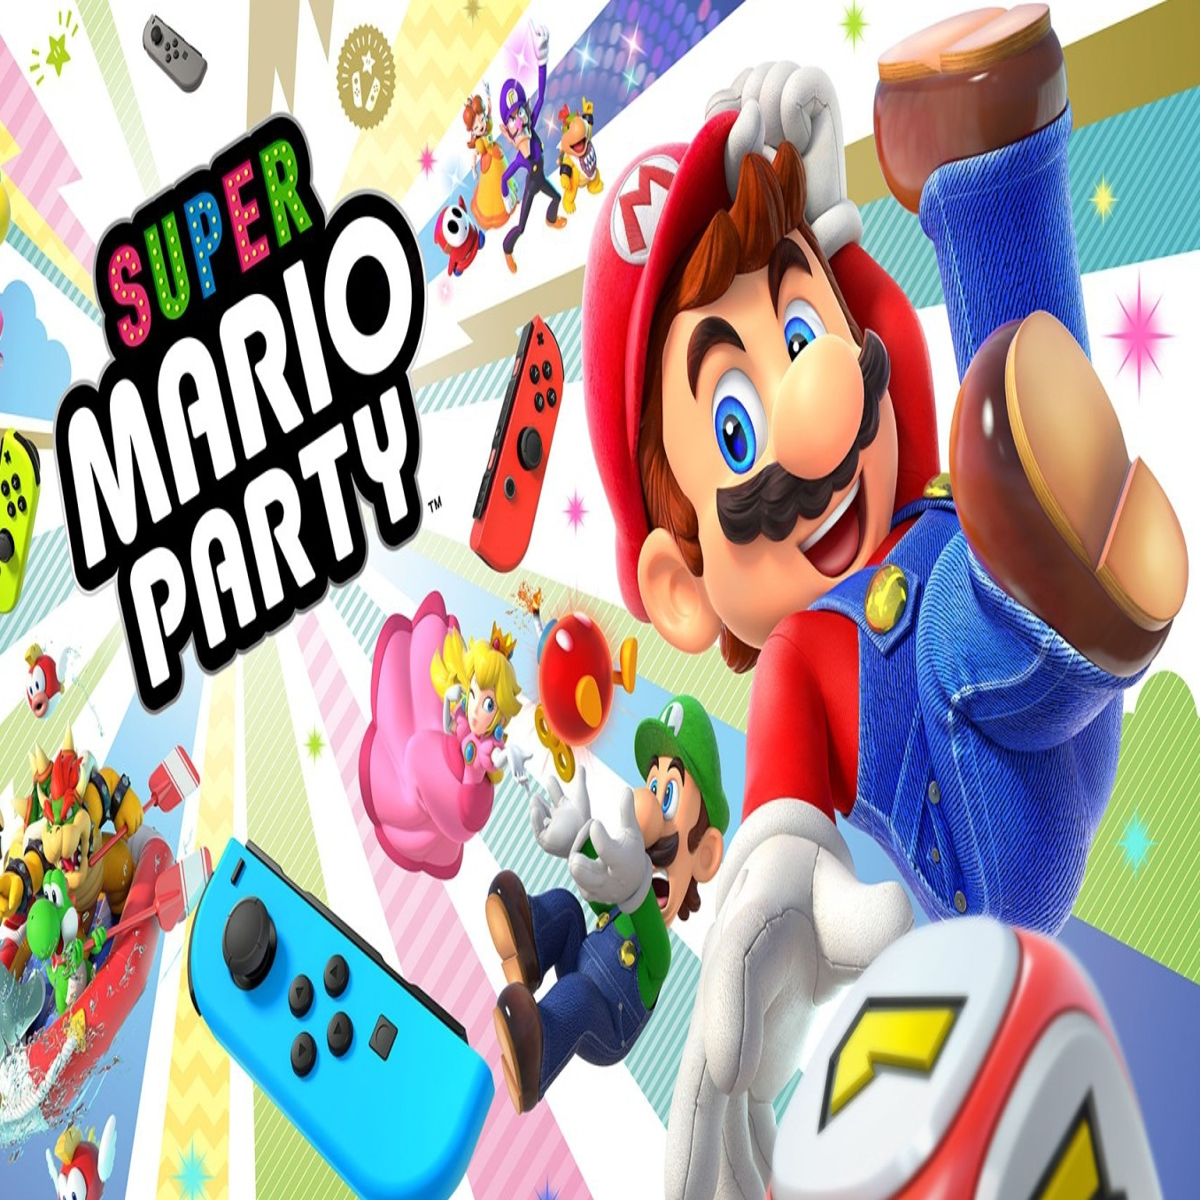 Super Mario Party review - silly, slick and spotty return for Nintendo's  madcap series